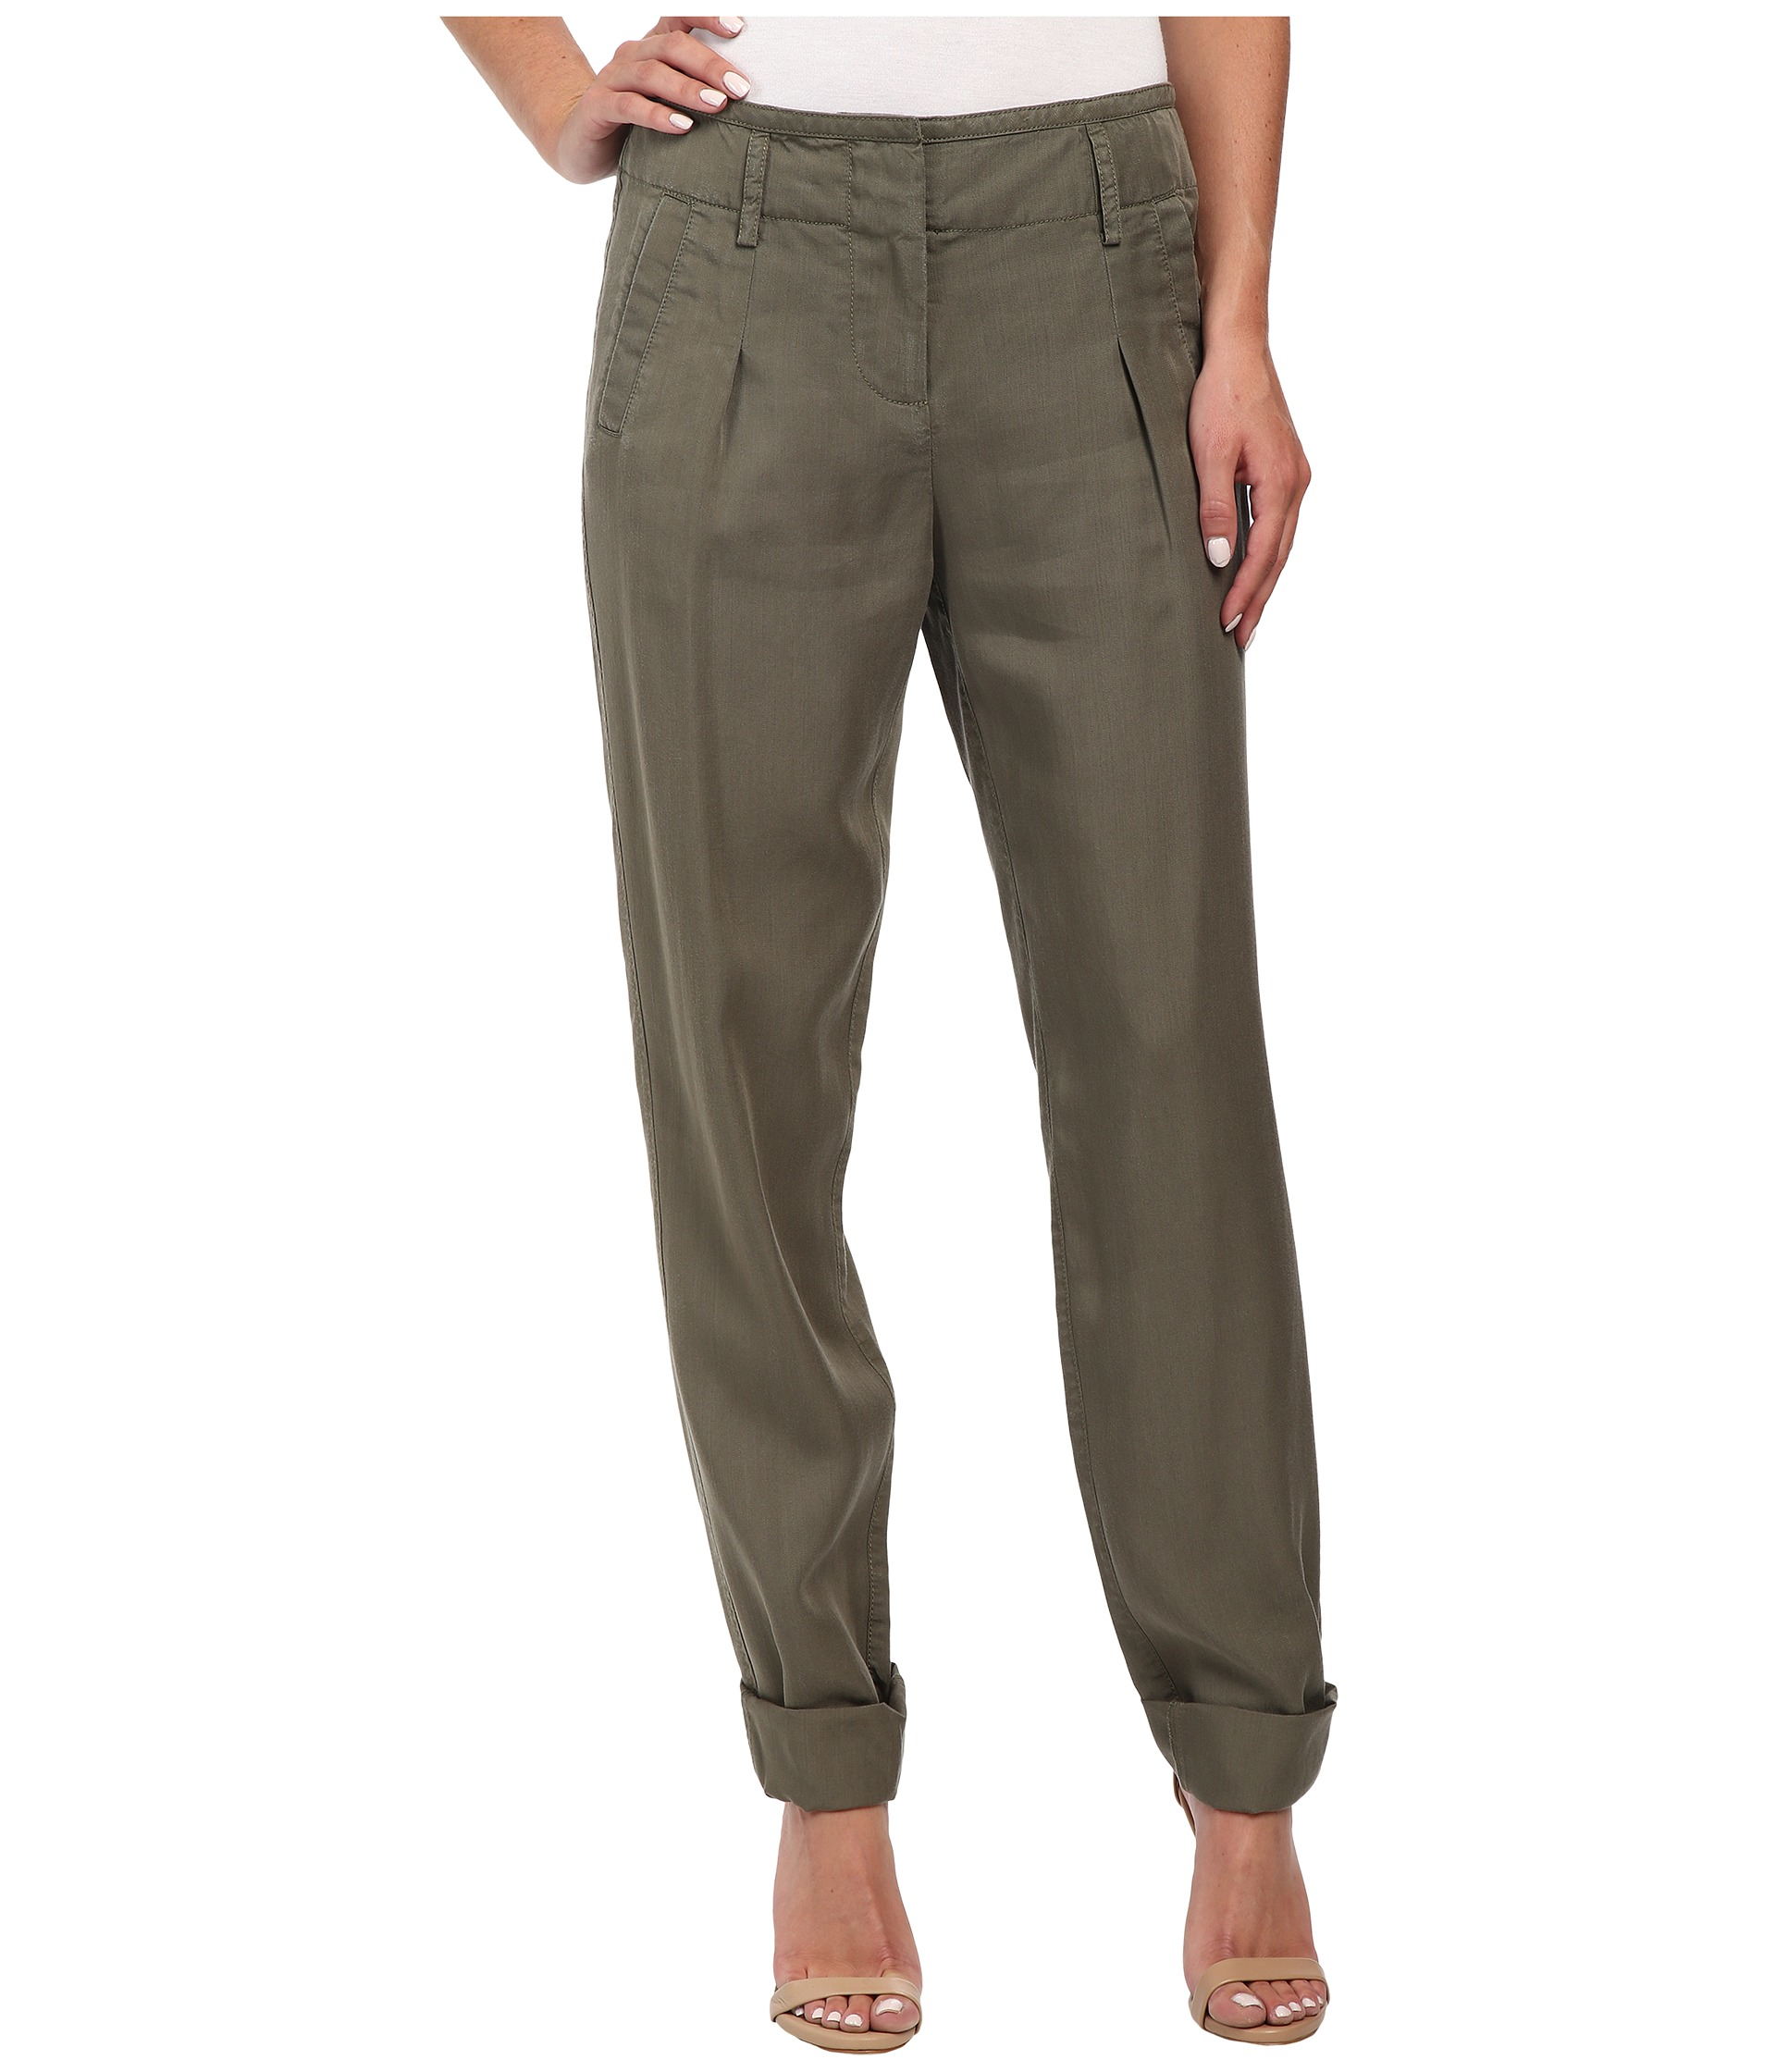 Lyst - Rebecca Taylor Army Twill Pants in Green